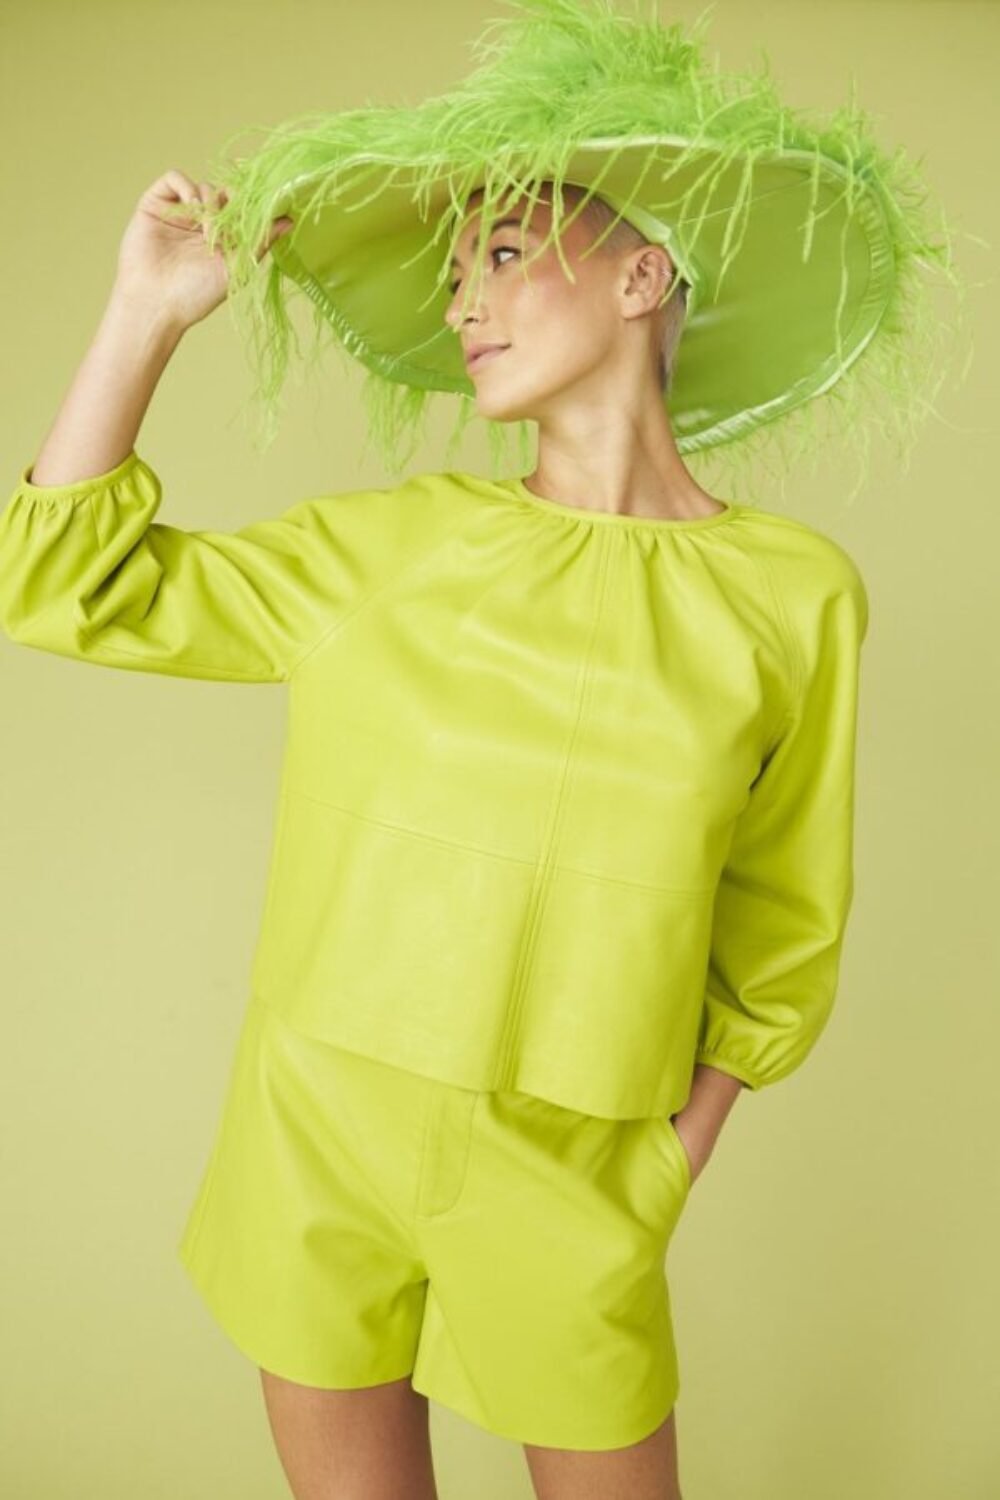 Shop Lux Lime Green Eco Leather Swing Top and women's luxury and designer clothes at www.lux-apparel.co.uk